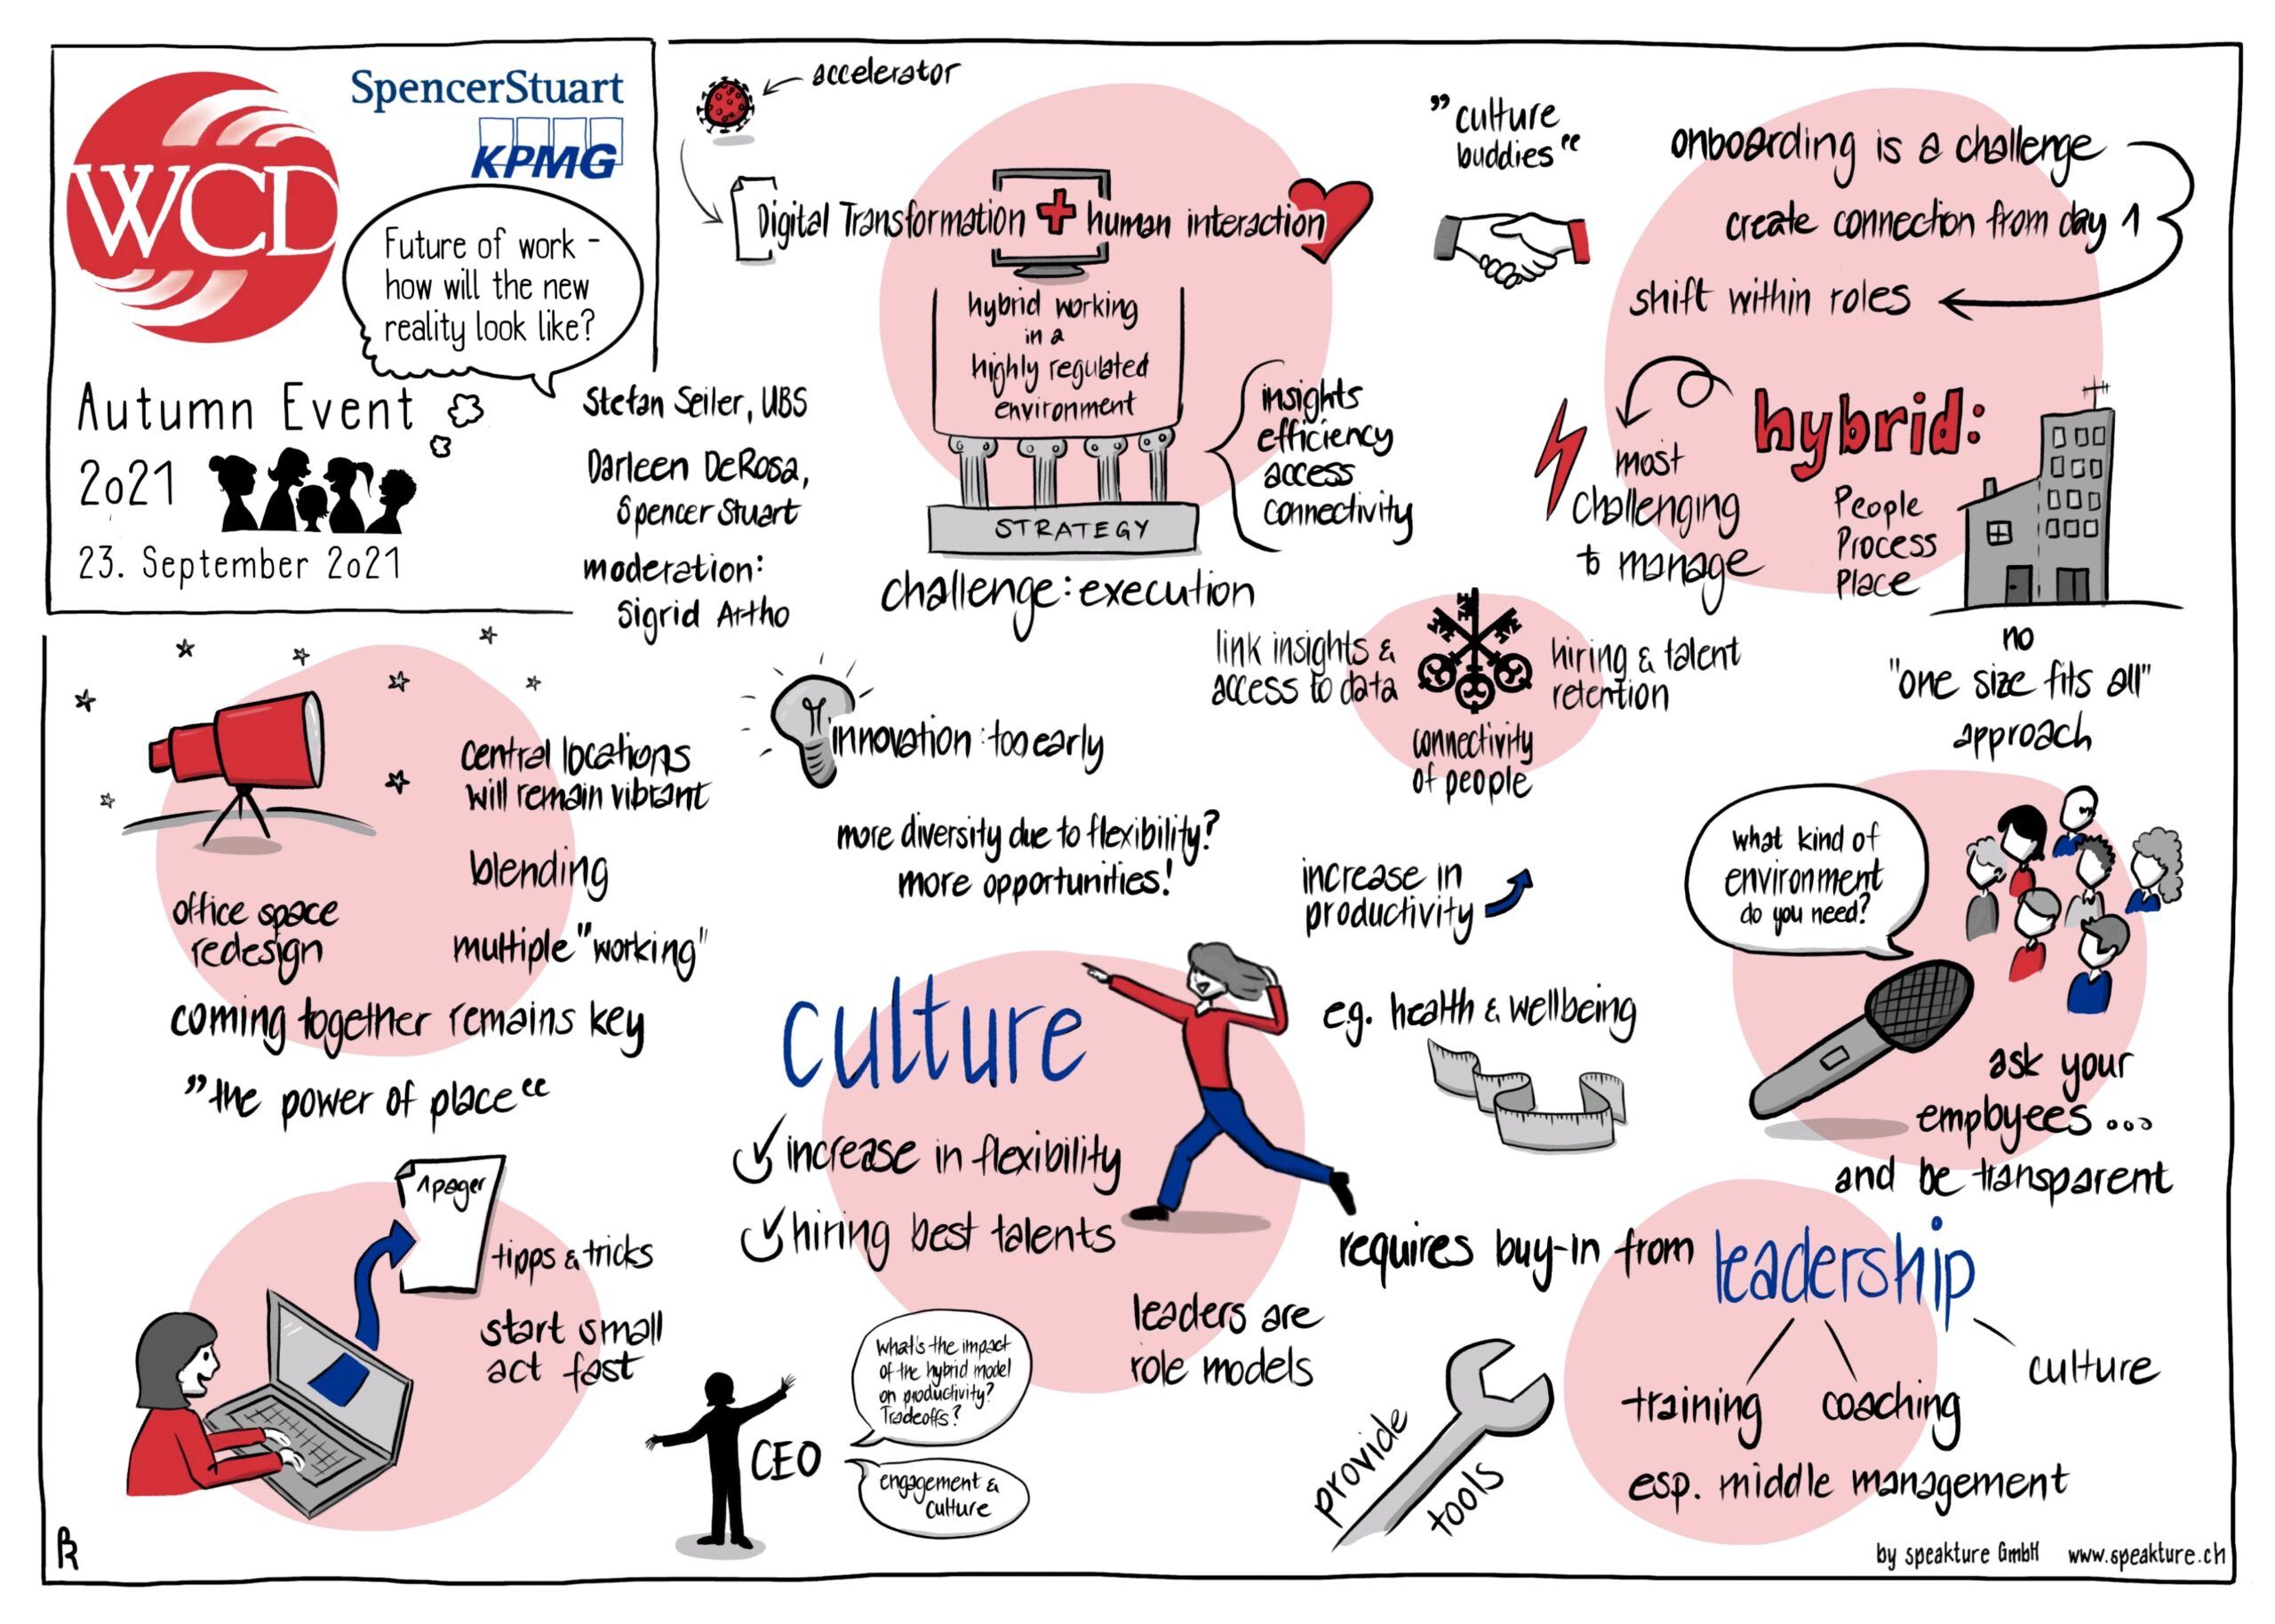 Graphic Recording by speakture for Women Corporate Directors WCD Switzerland at autumn event